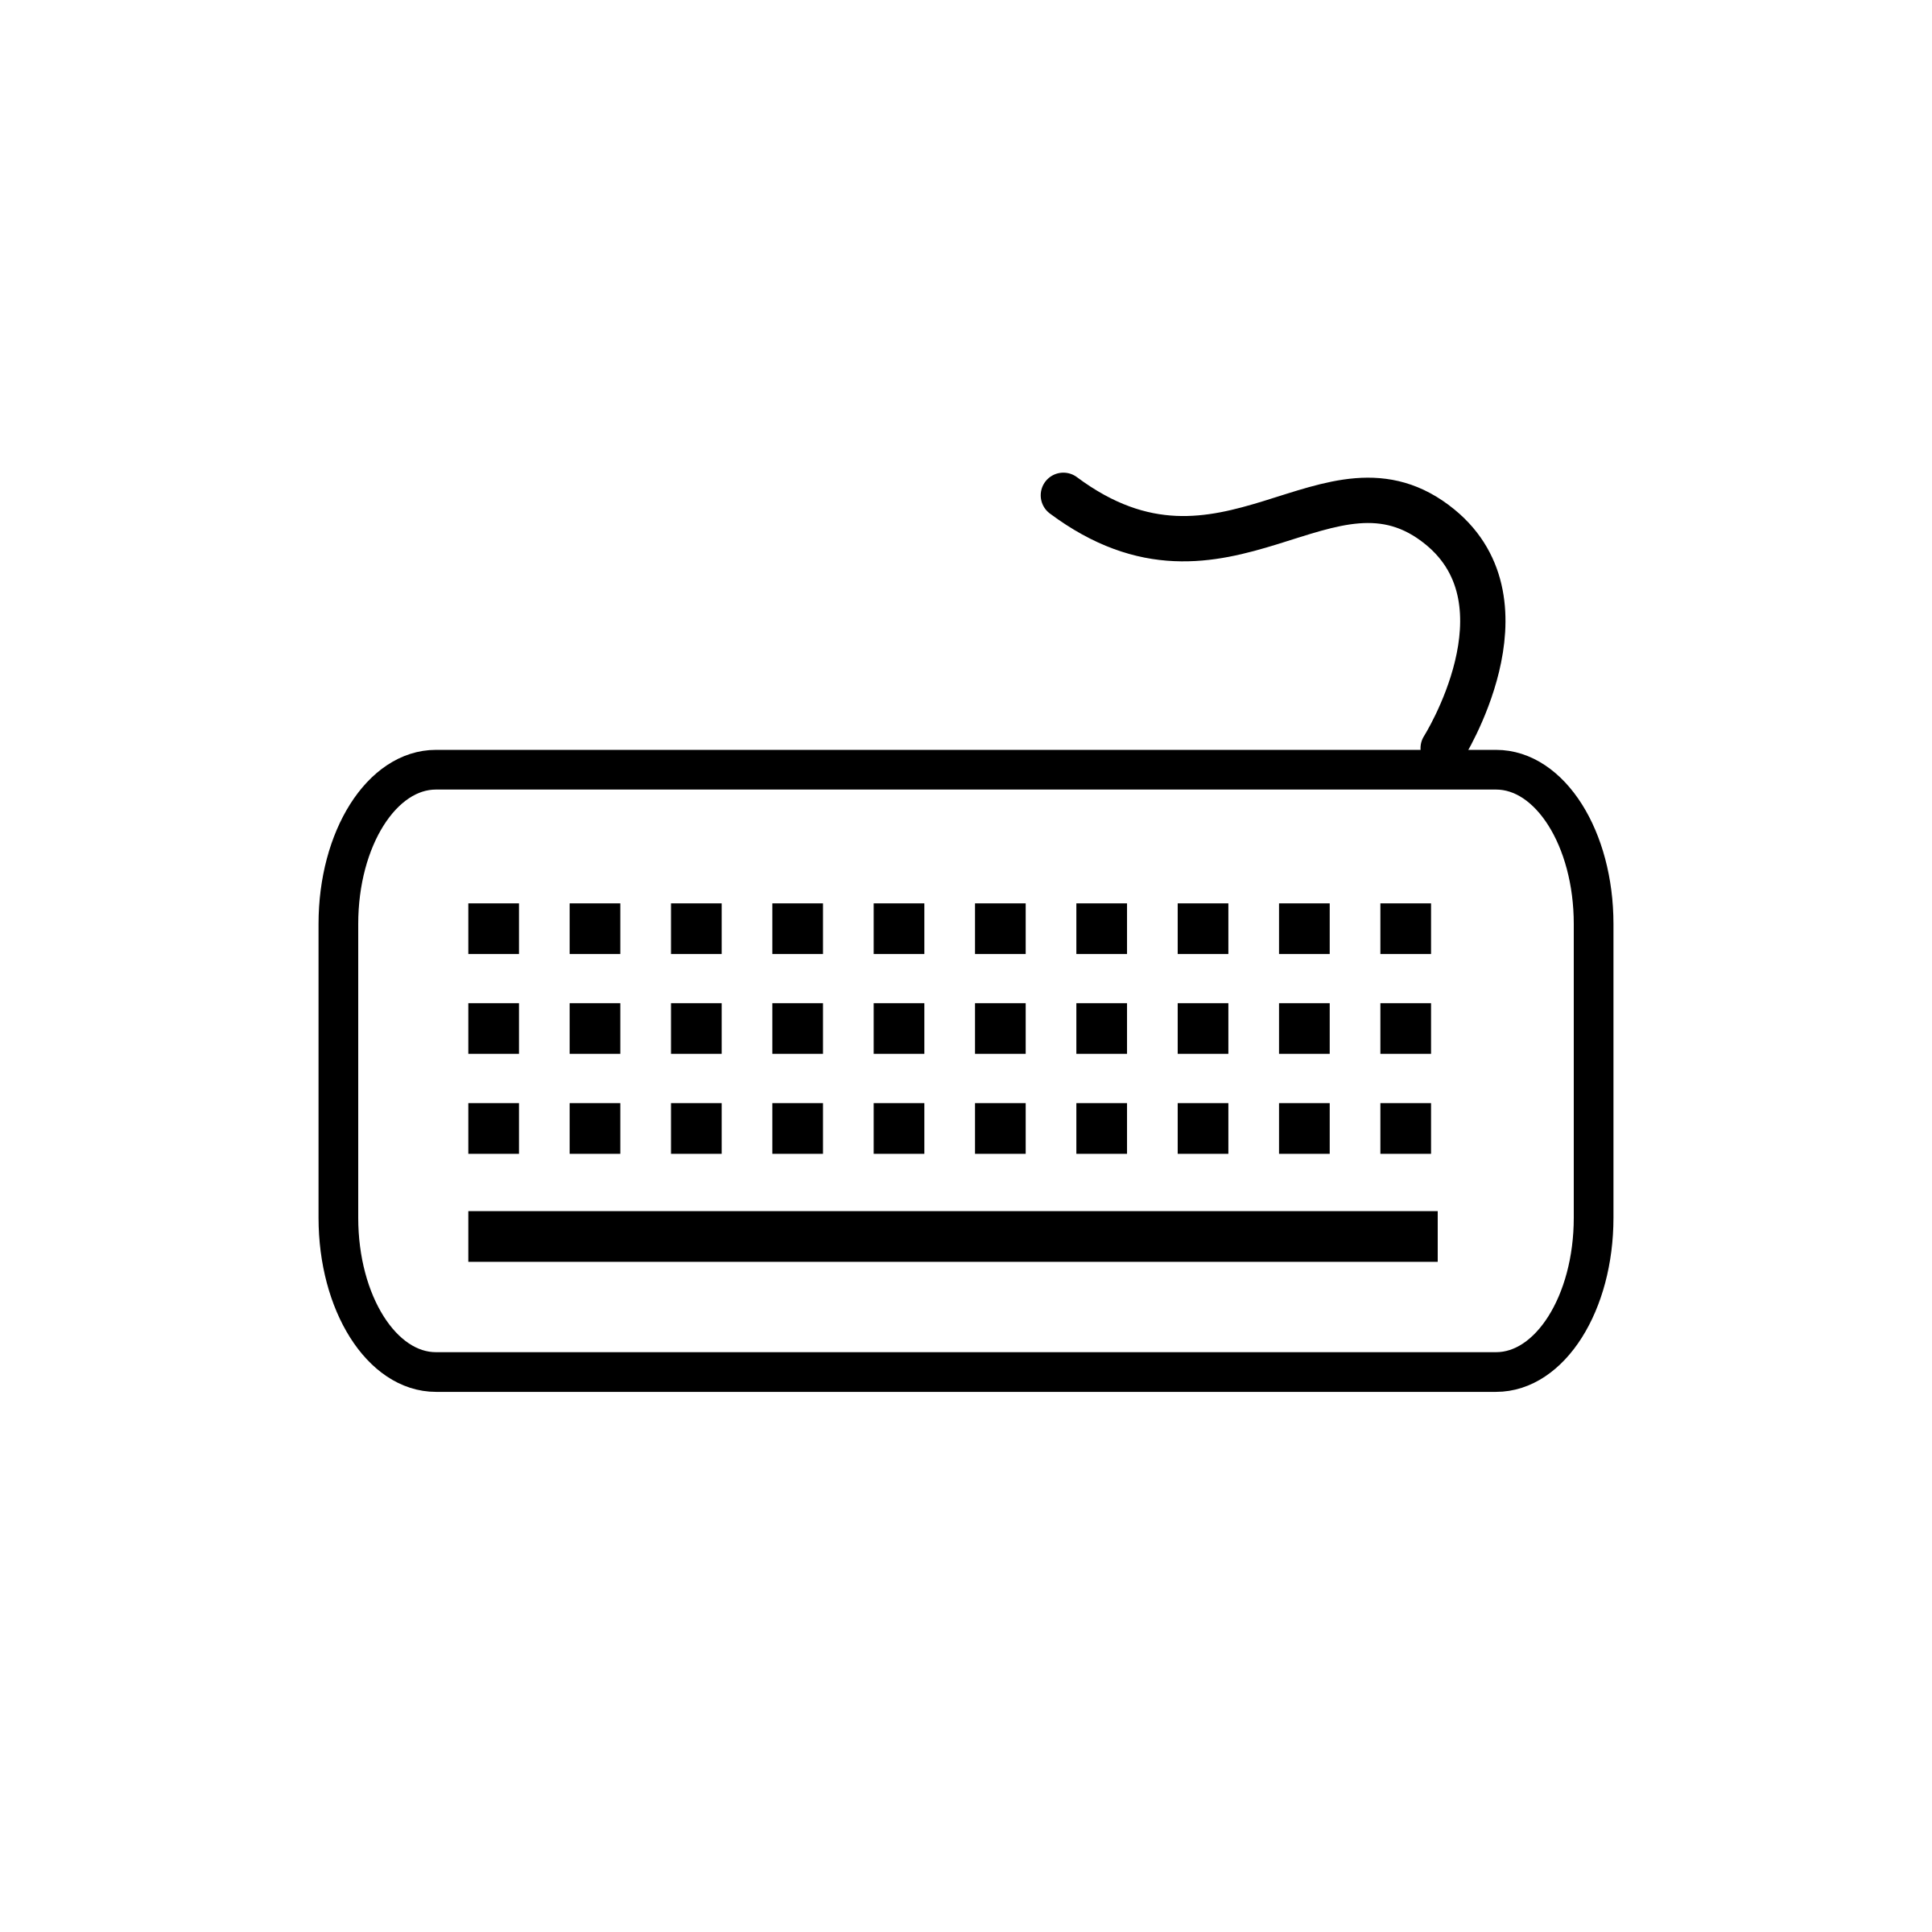 Keyboard clipart compuer. Icon big image png